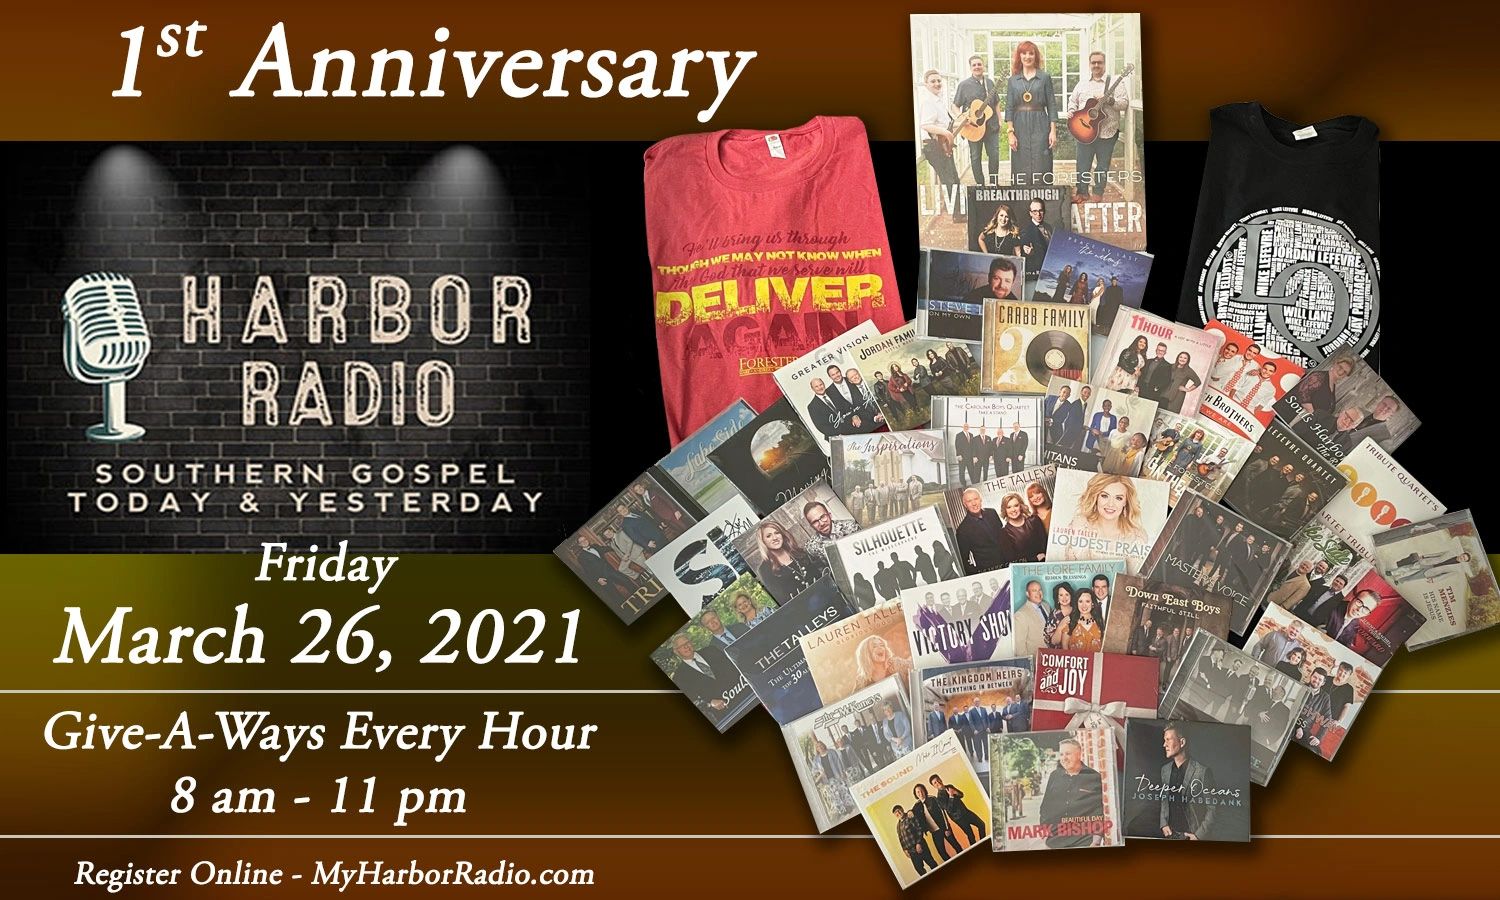 March 26, 2021 our 1st anniversary of Harbor Radio